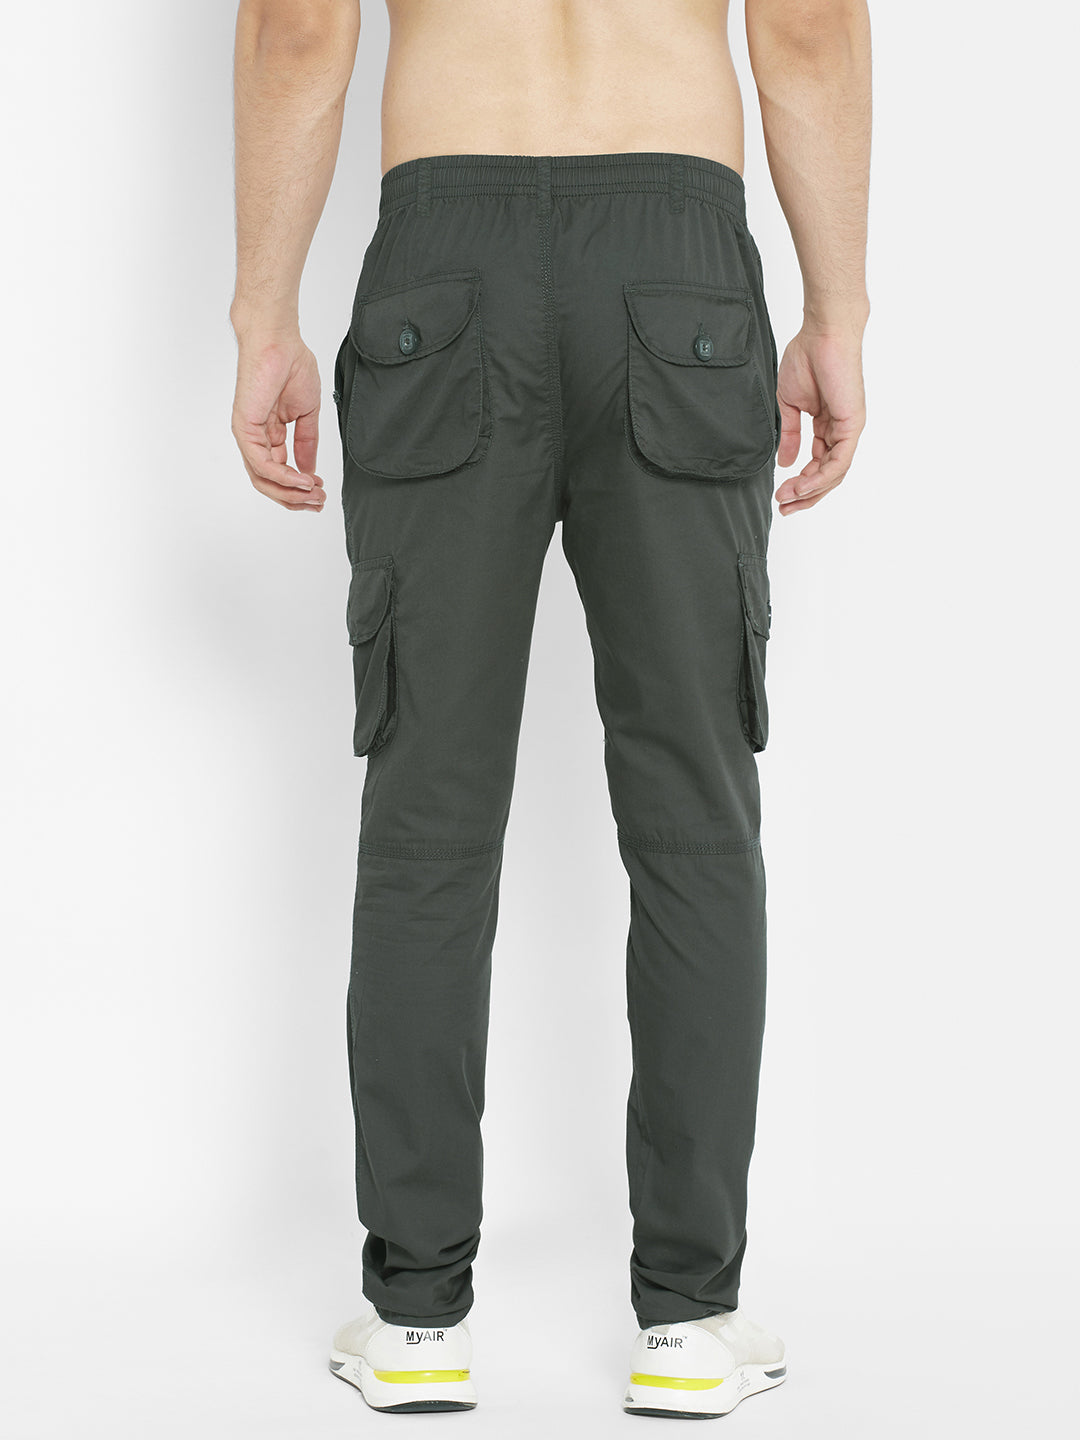 Waterfowl Pants | Browning Wasatch-CB 6-Pocket Cargo Hunting Pants